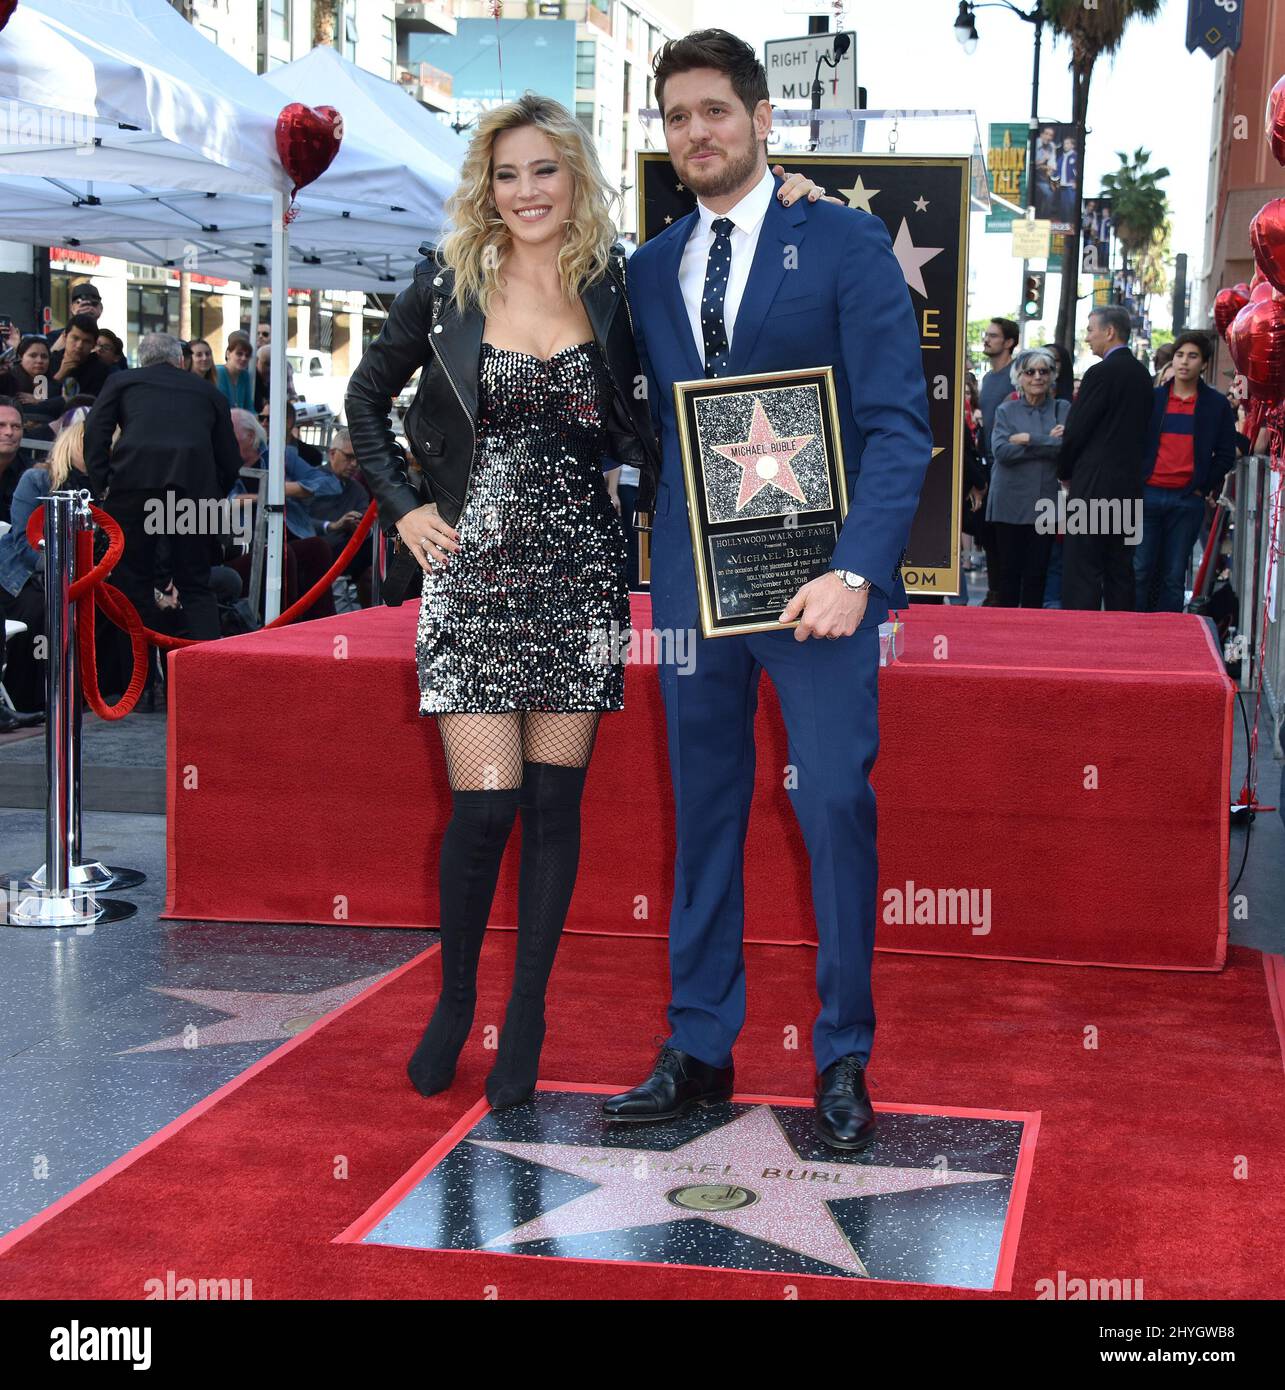 Michael Buble and wife Luisana Lopilato at Michael Buble's Hollywood Walk of Fame Star Ceremony held in front of W Hotel on November 16 Stock Photo